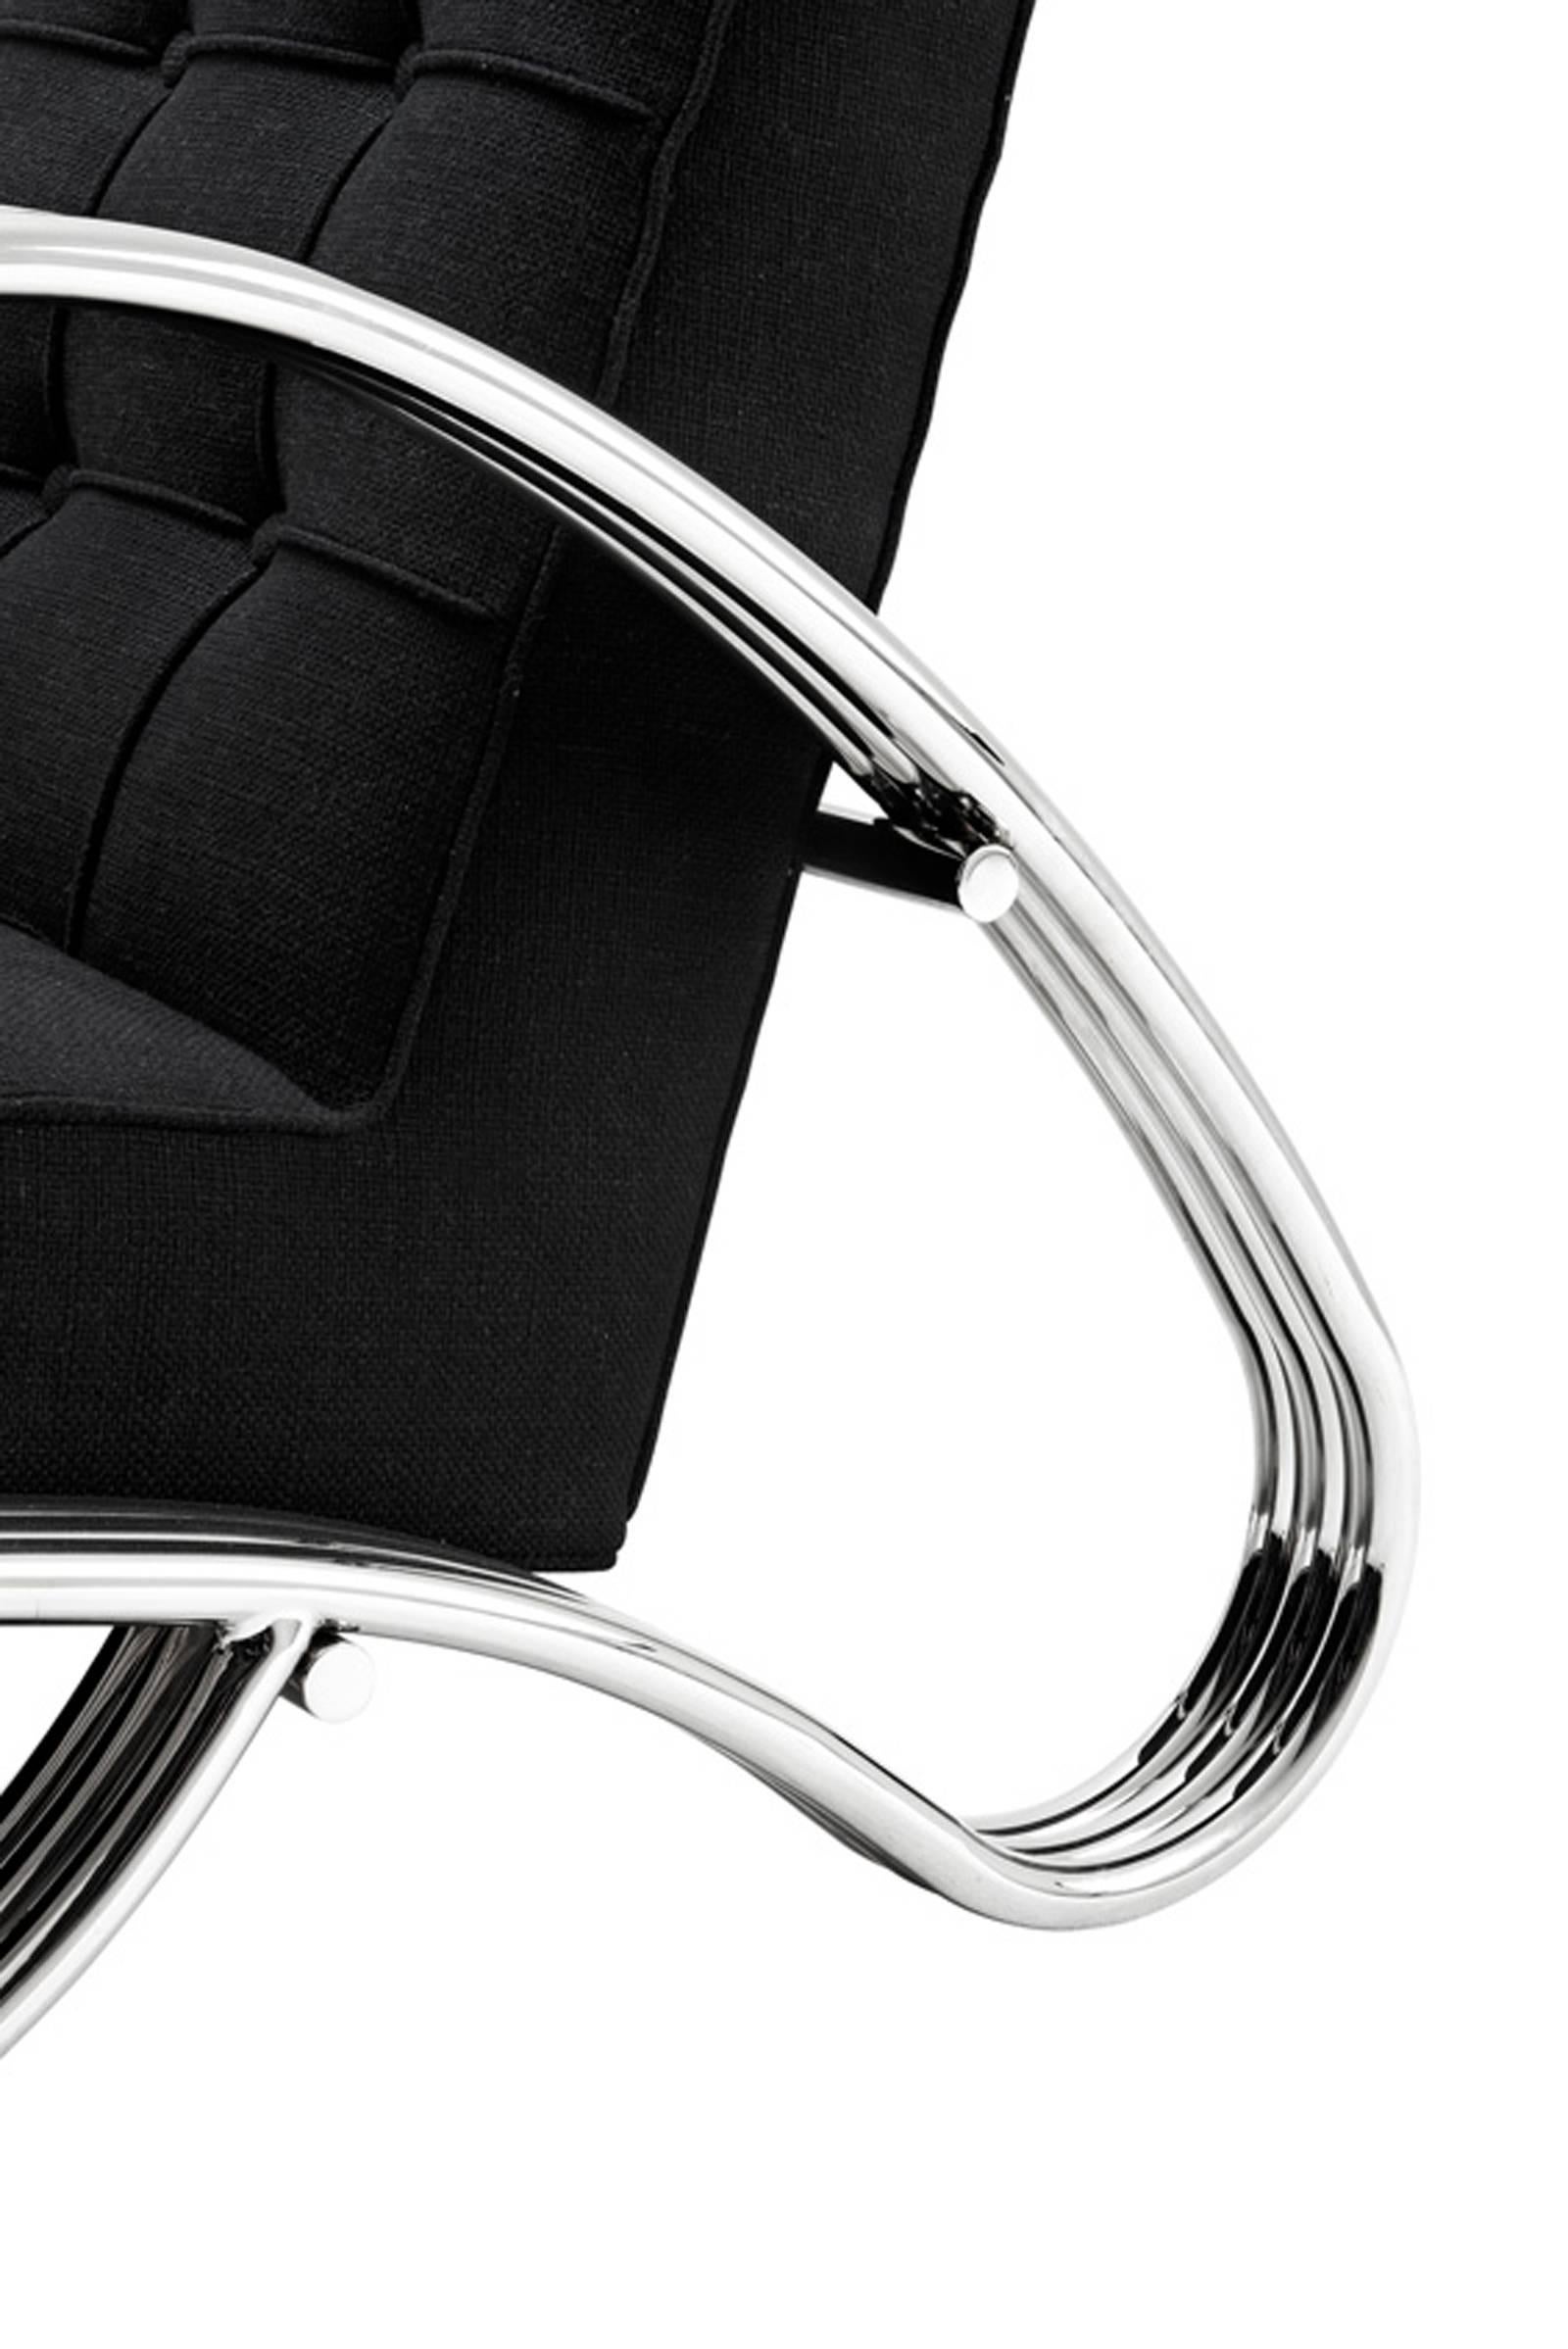 Chinese Cadillac Armchair in Stainless Steel and Panama Fabric, 2016